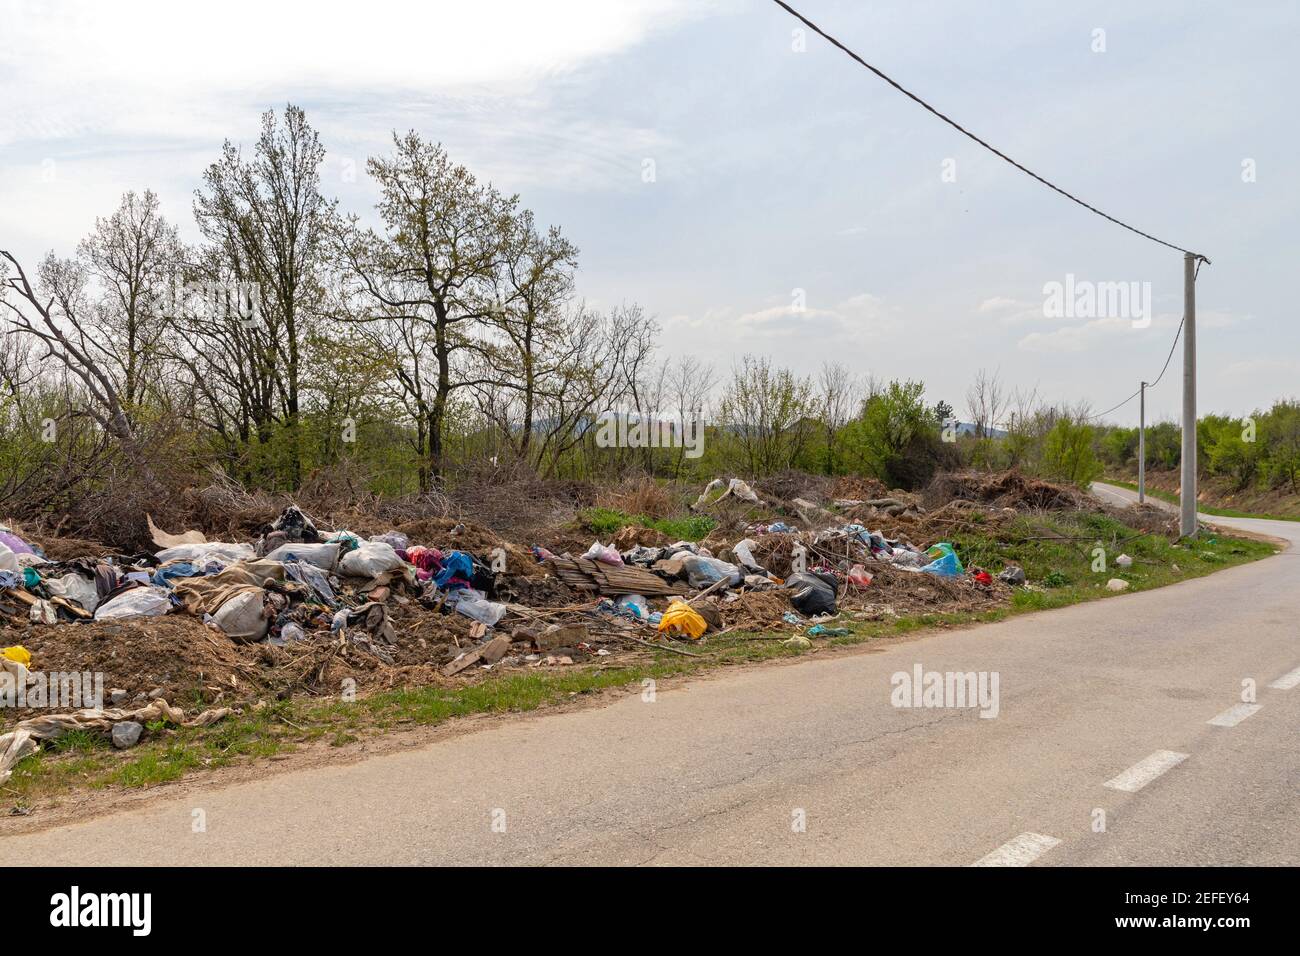 Illegal Dump Site at Side of Road Environment Pollution Problems Stock Photo